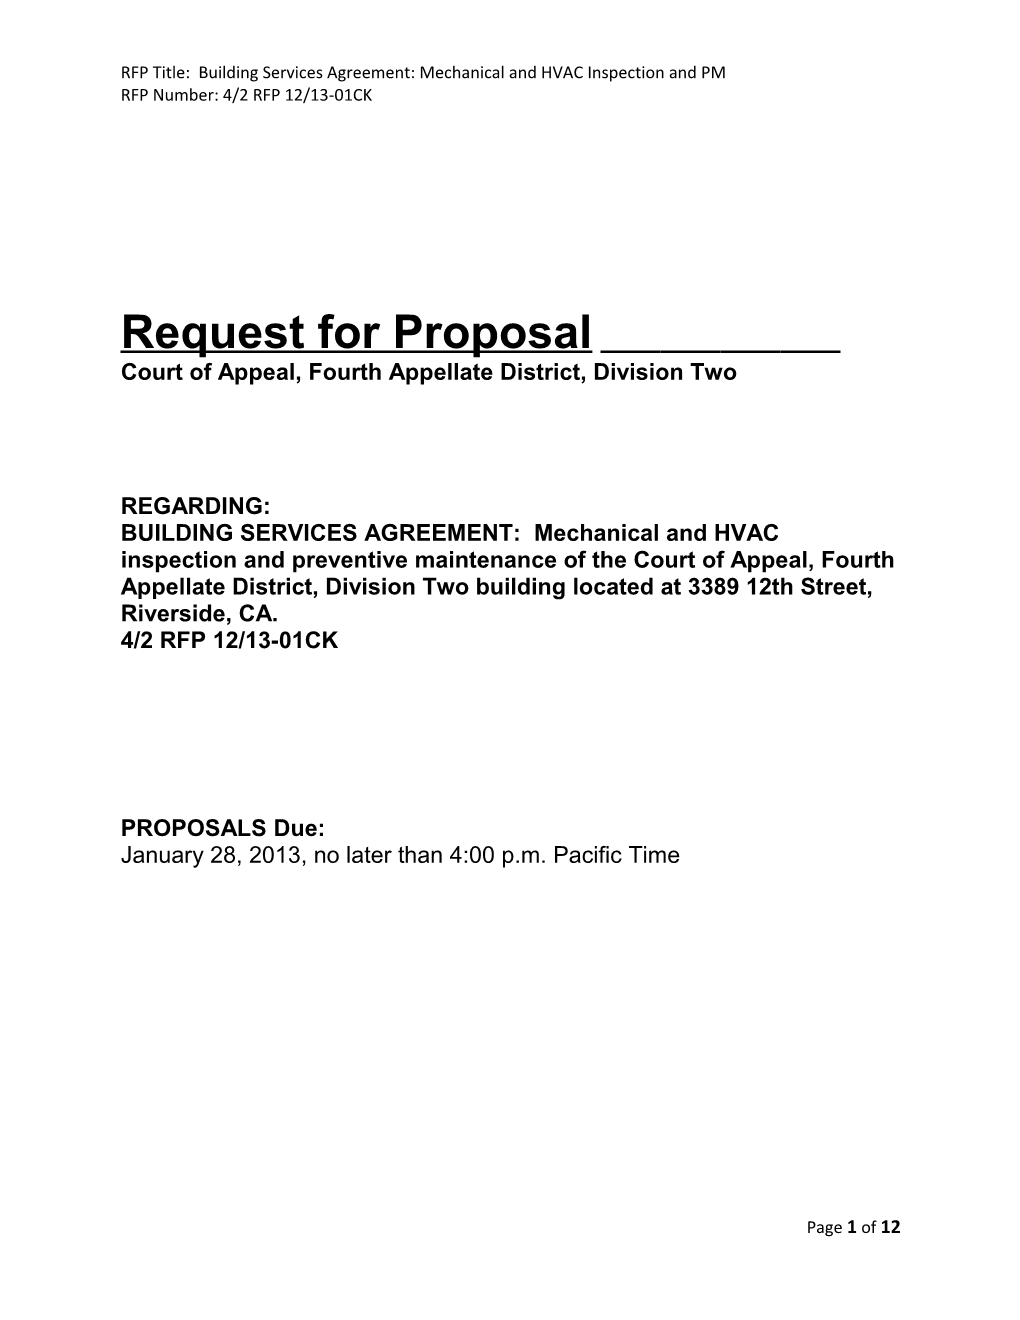 RFP Title: Building Services Agreement: Mechanical and HVAC Inspection and PM